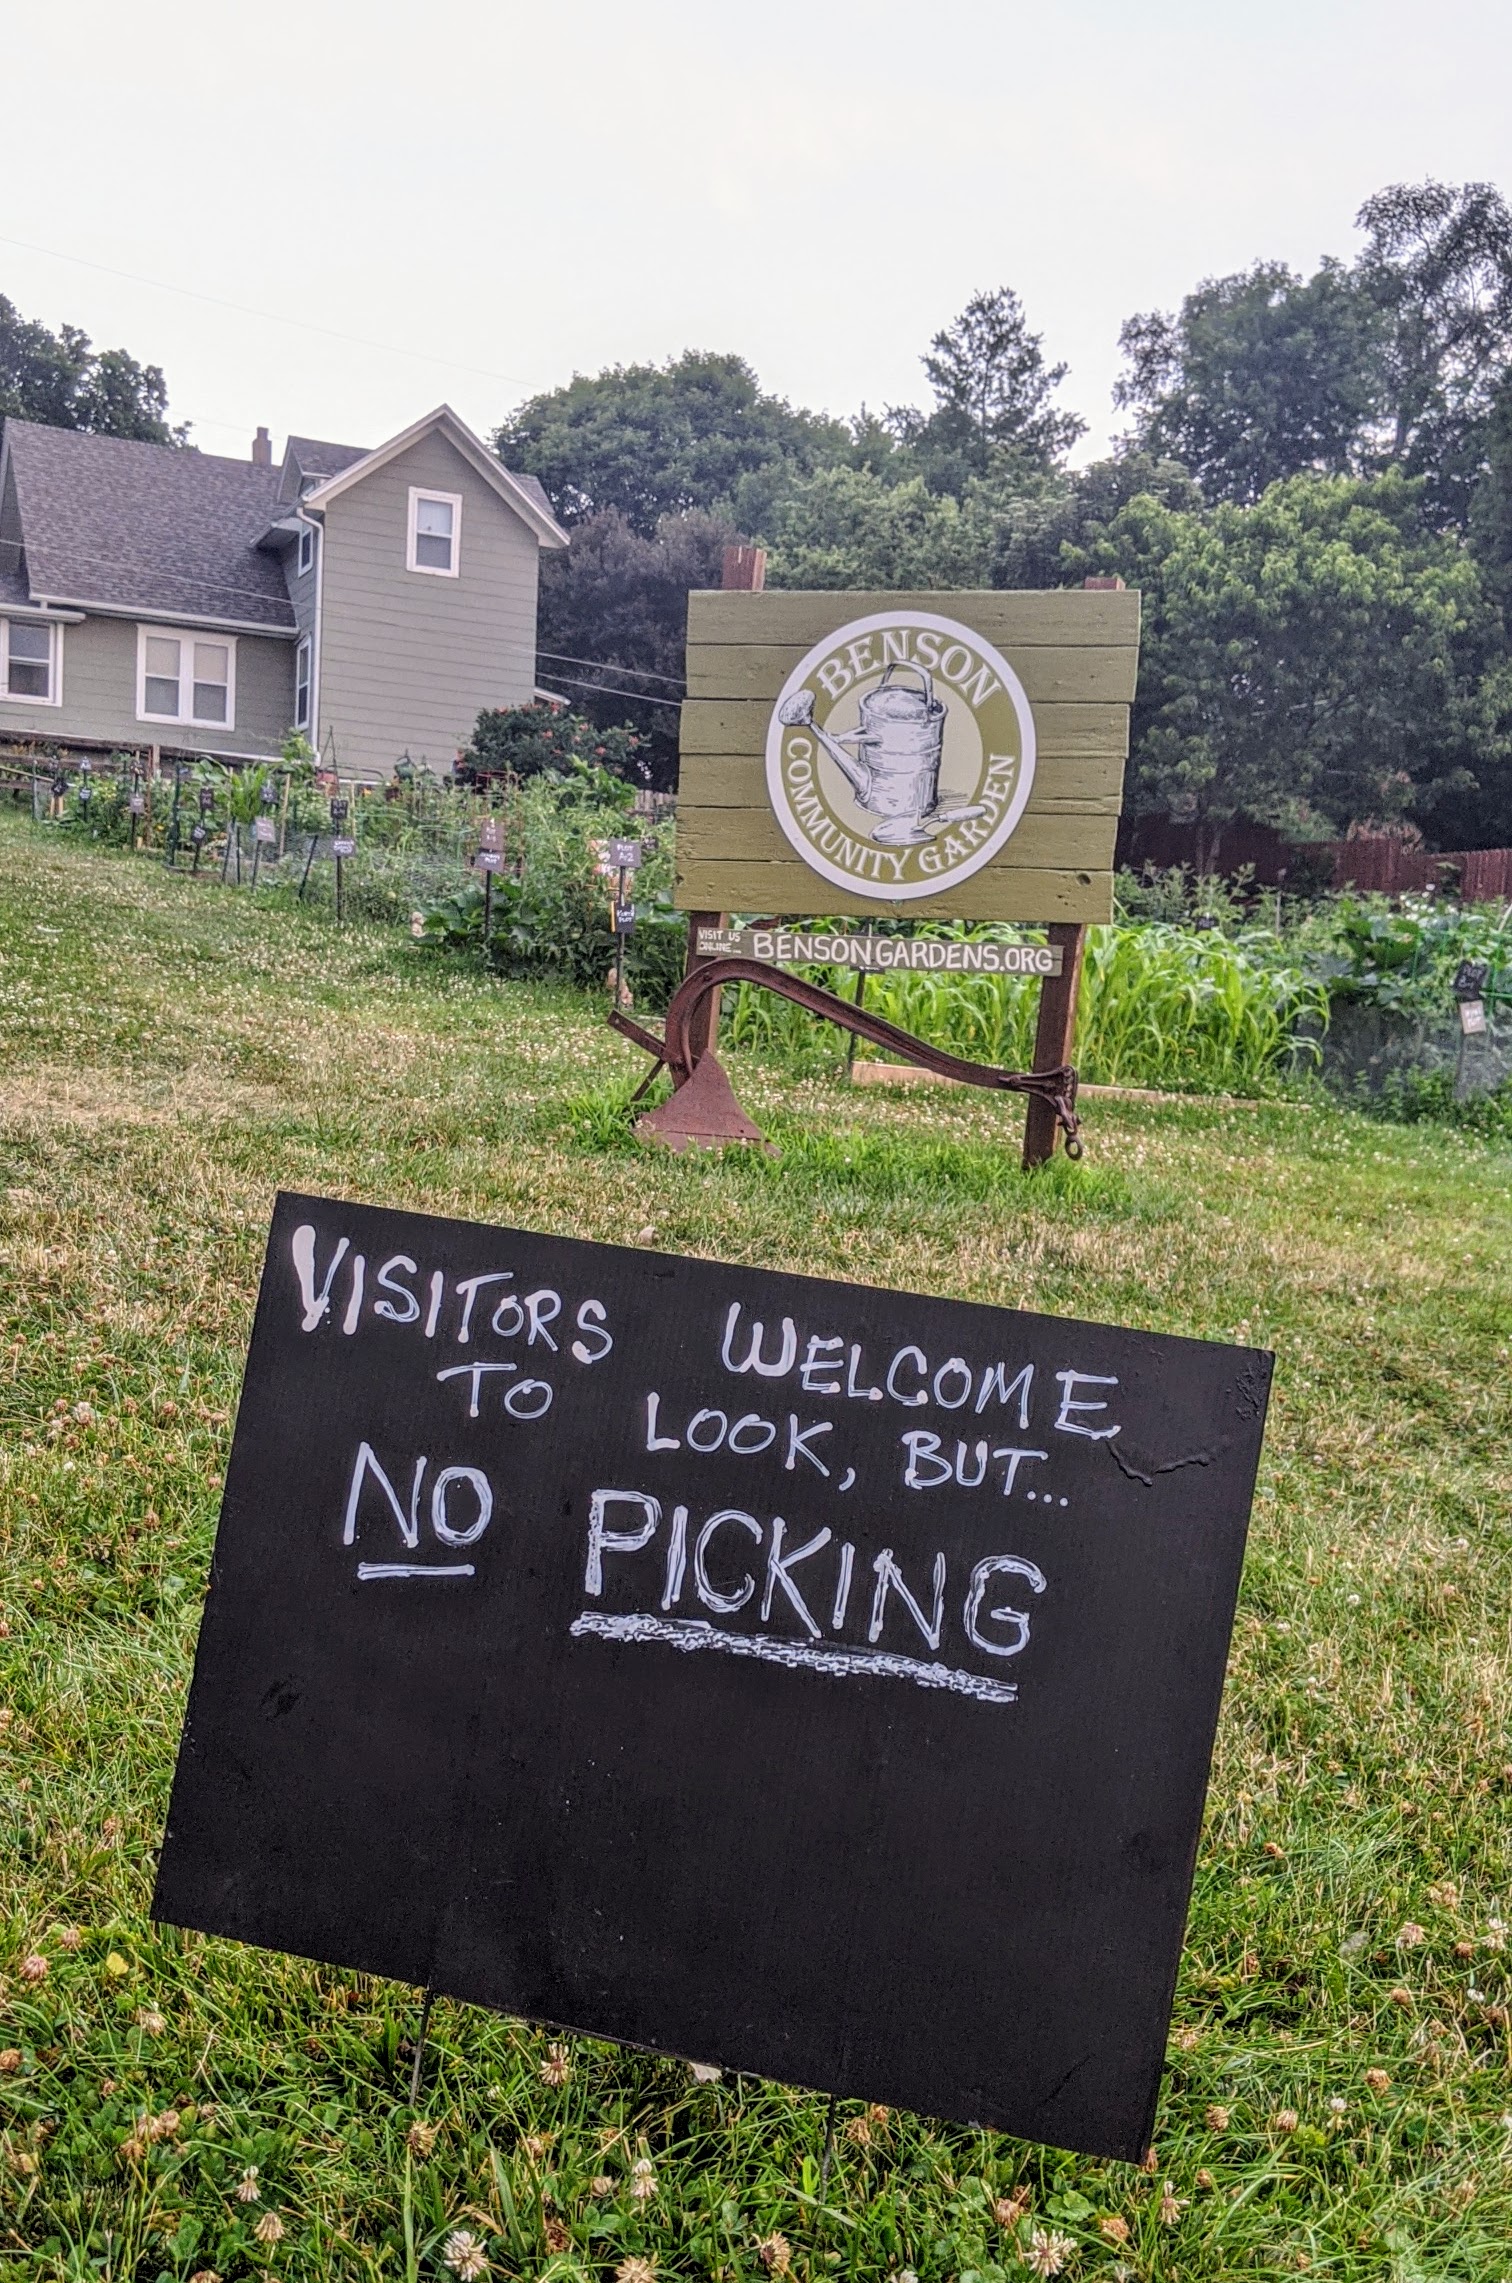 Visitors welcome to look, but please NO PICKING!